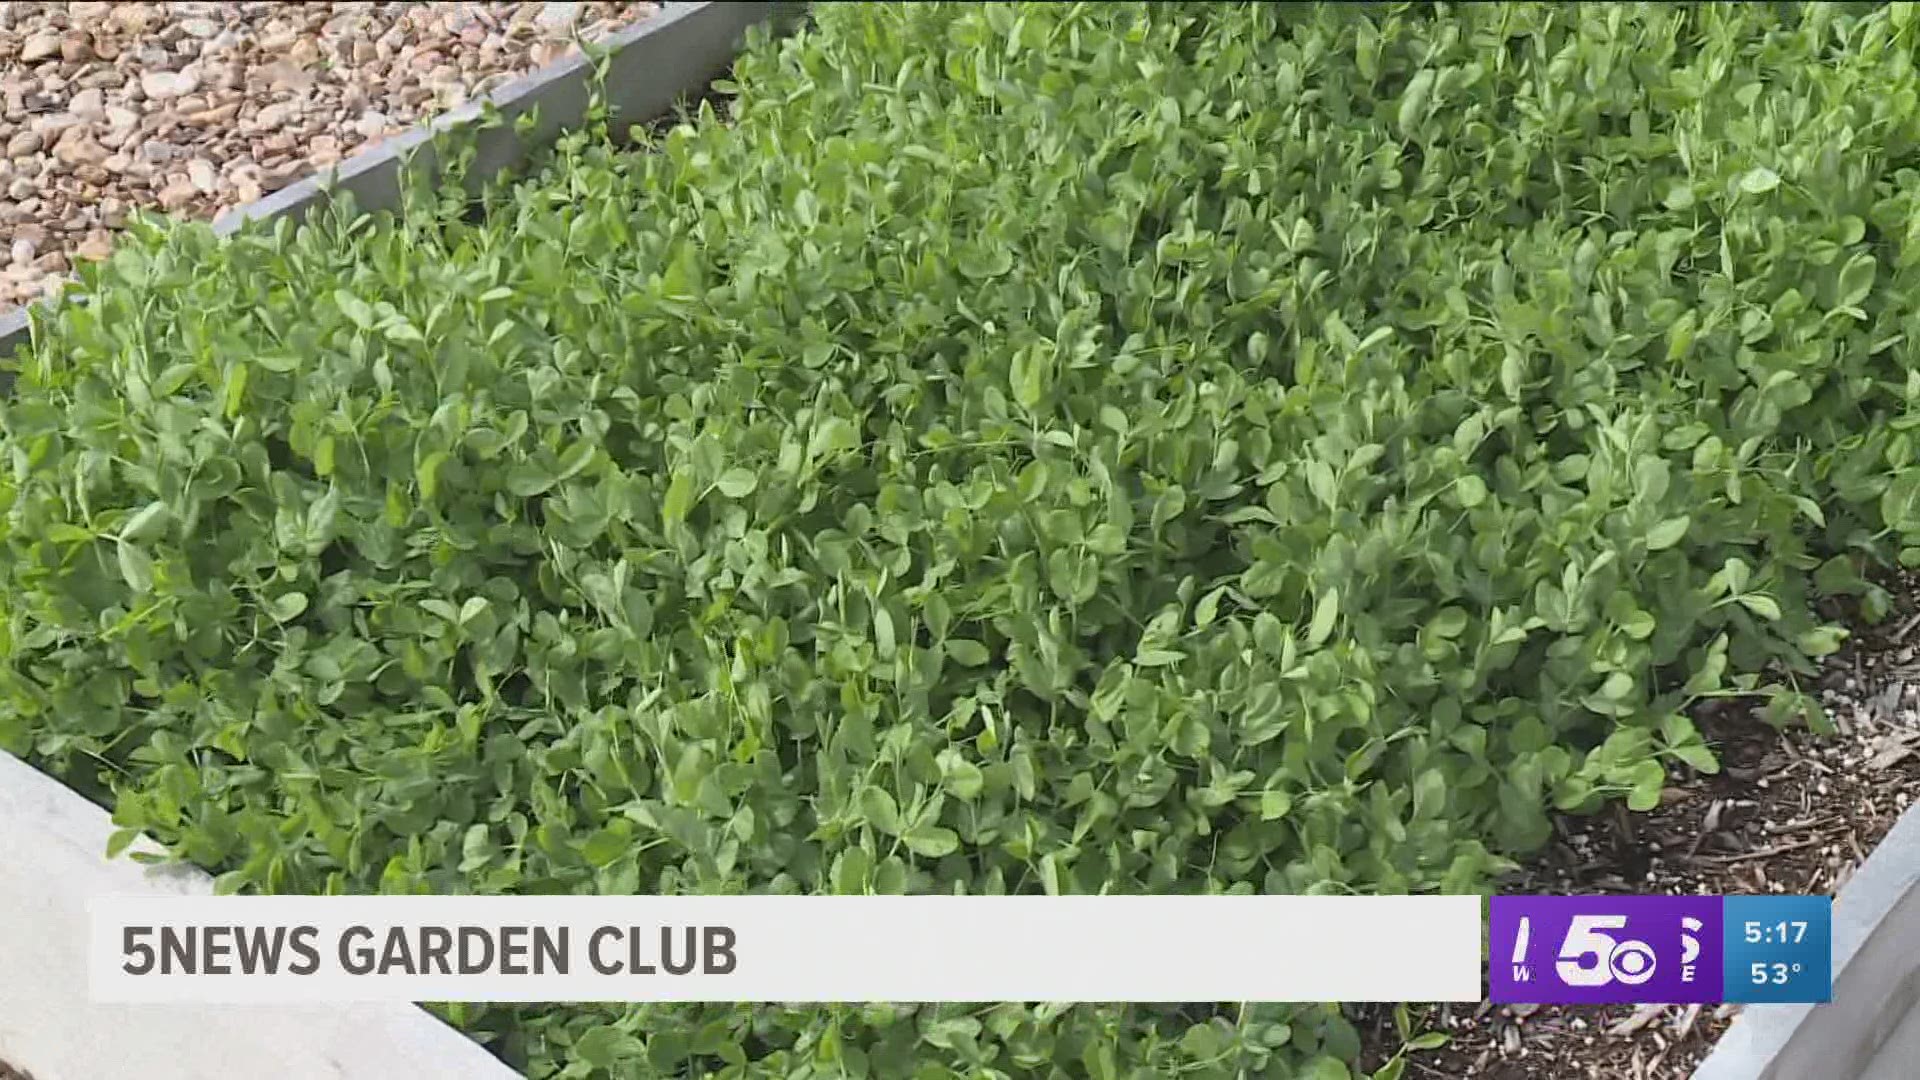 Join 5NEWS Anchor Daren Bobb and Garden IQ to learn about cover crops and how they protect your garden beds.